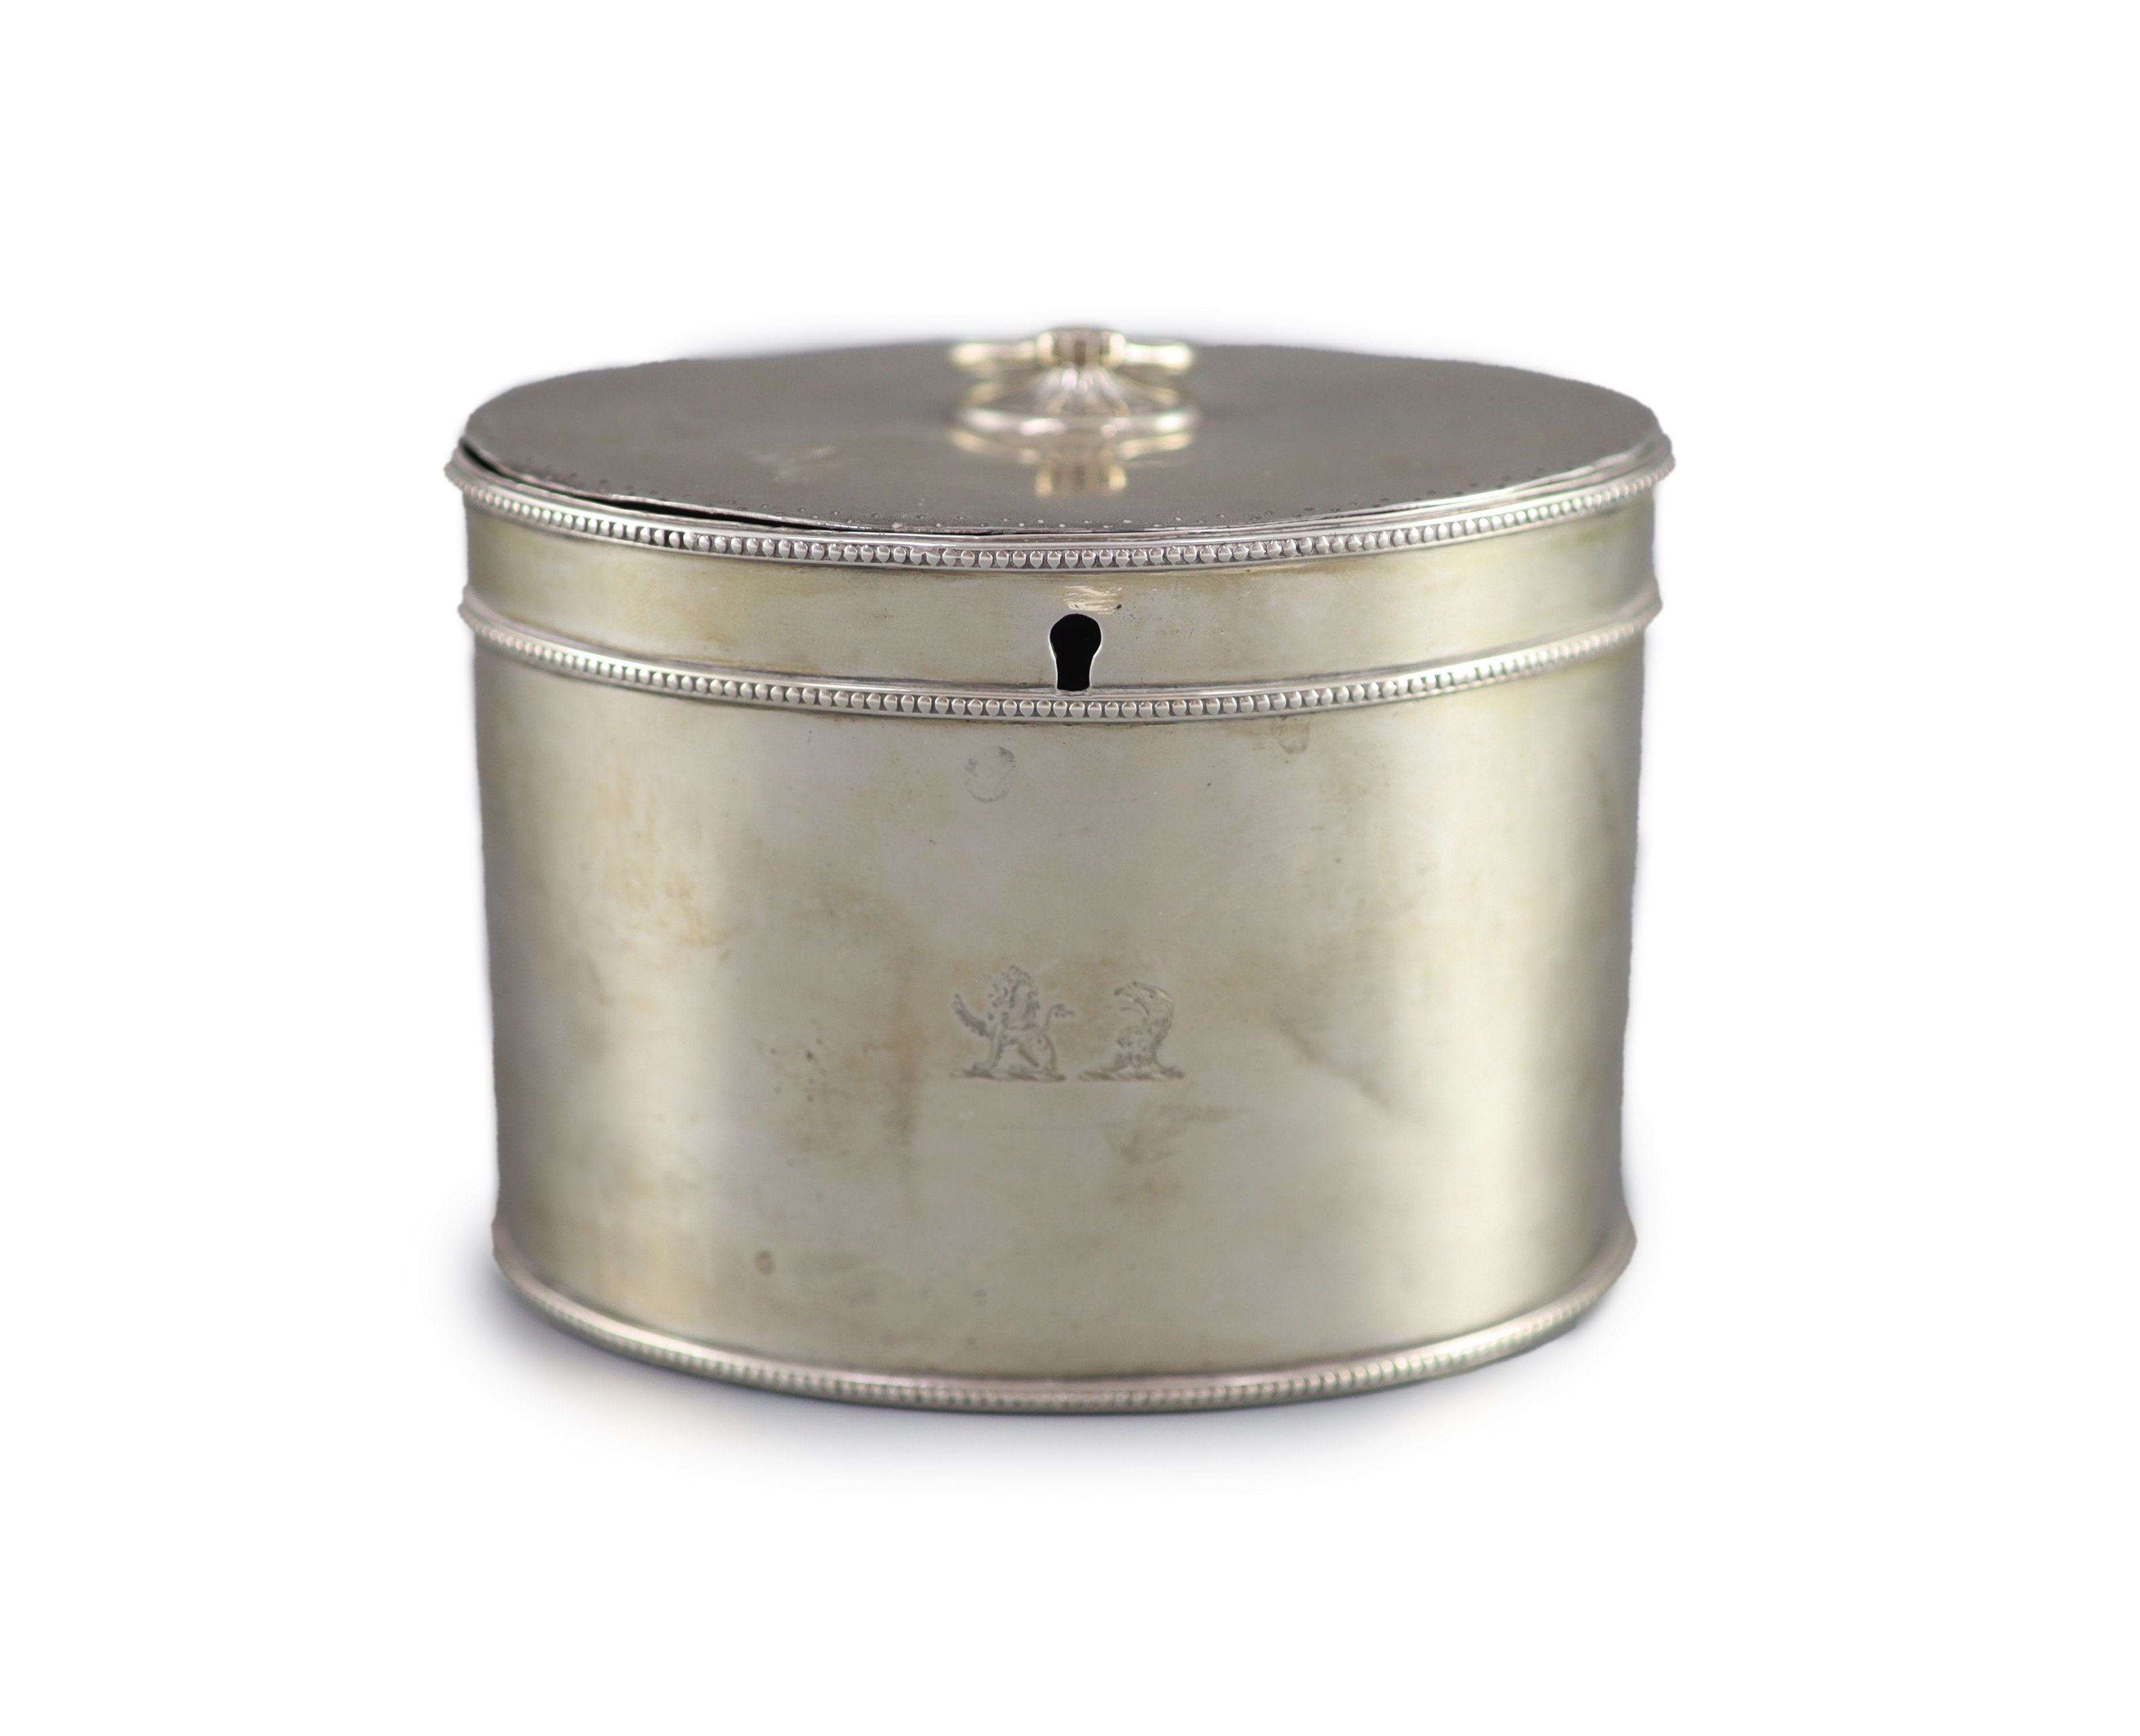 A George III silver oval tea caddy by John Younge & Co